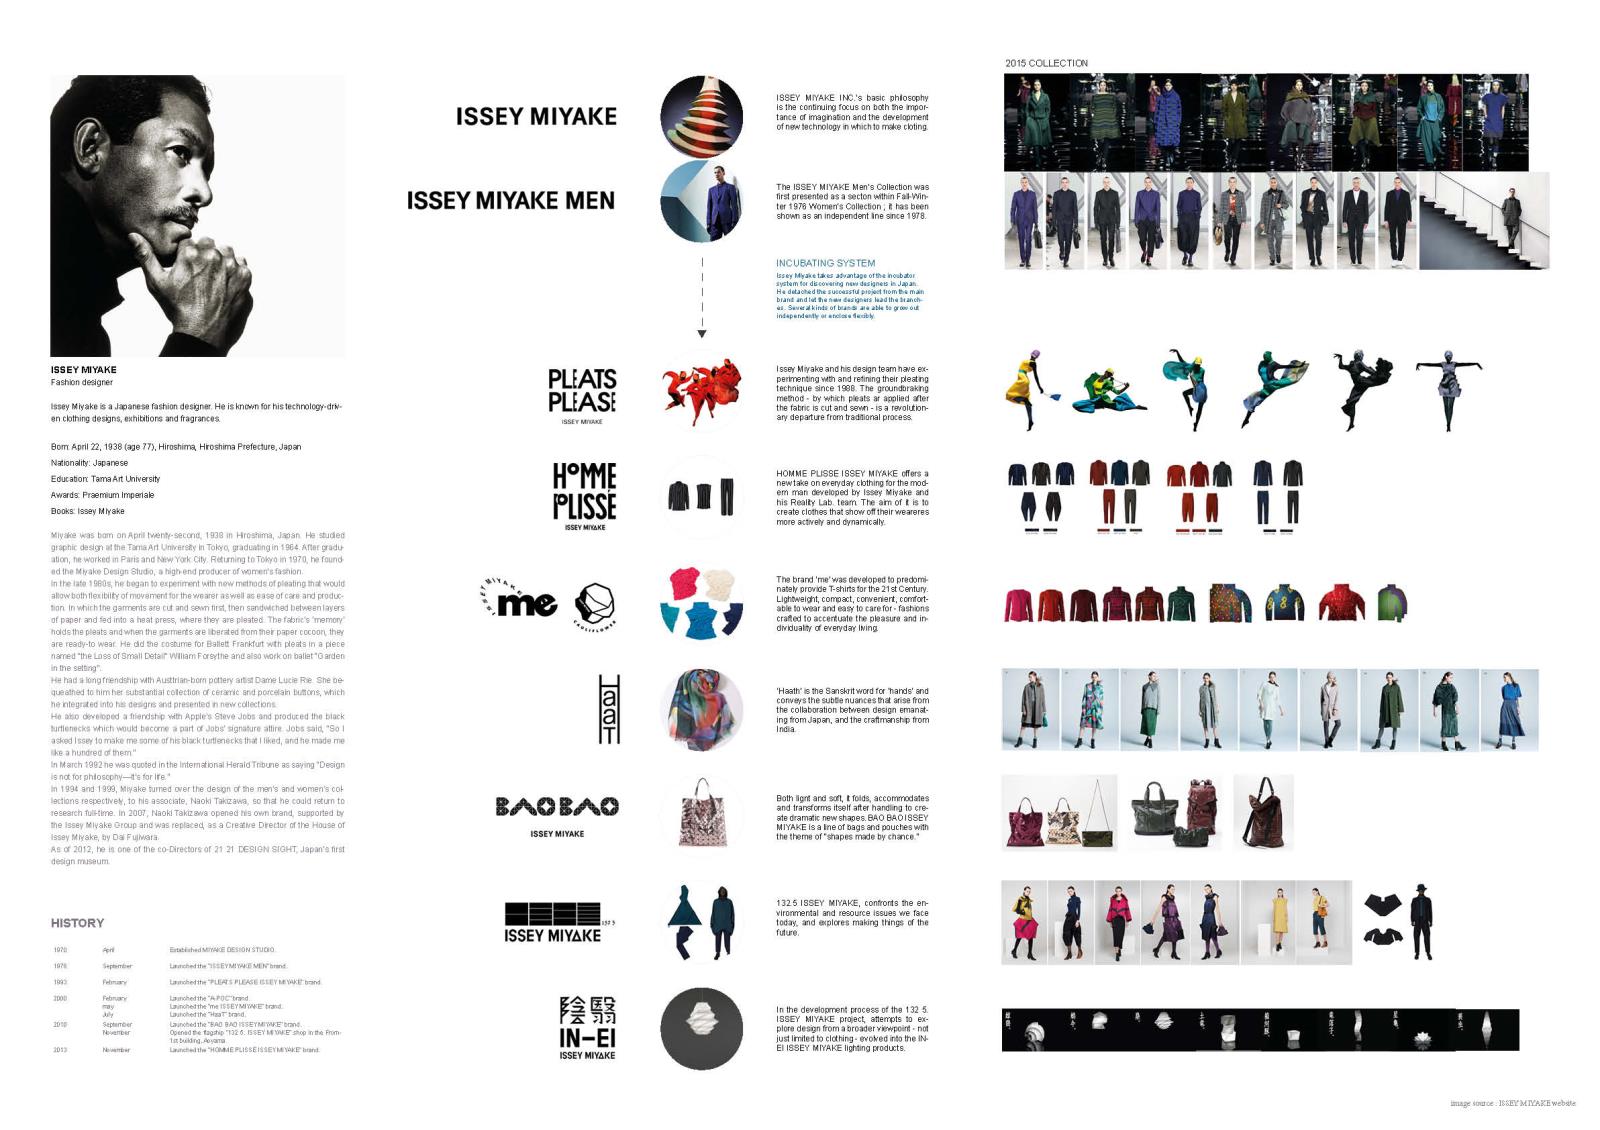 Size Charts by Brand, The official ISSEY MIYAKE ONLINE STORE